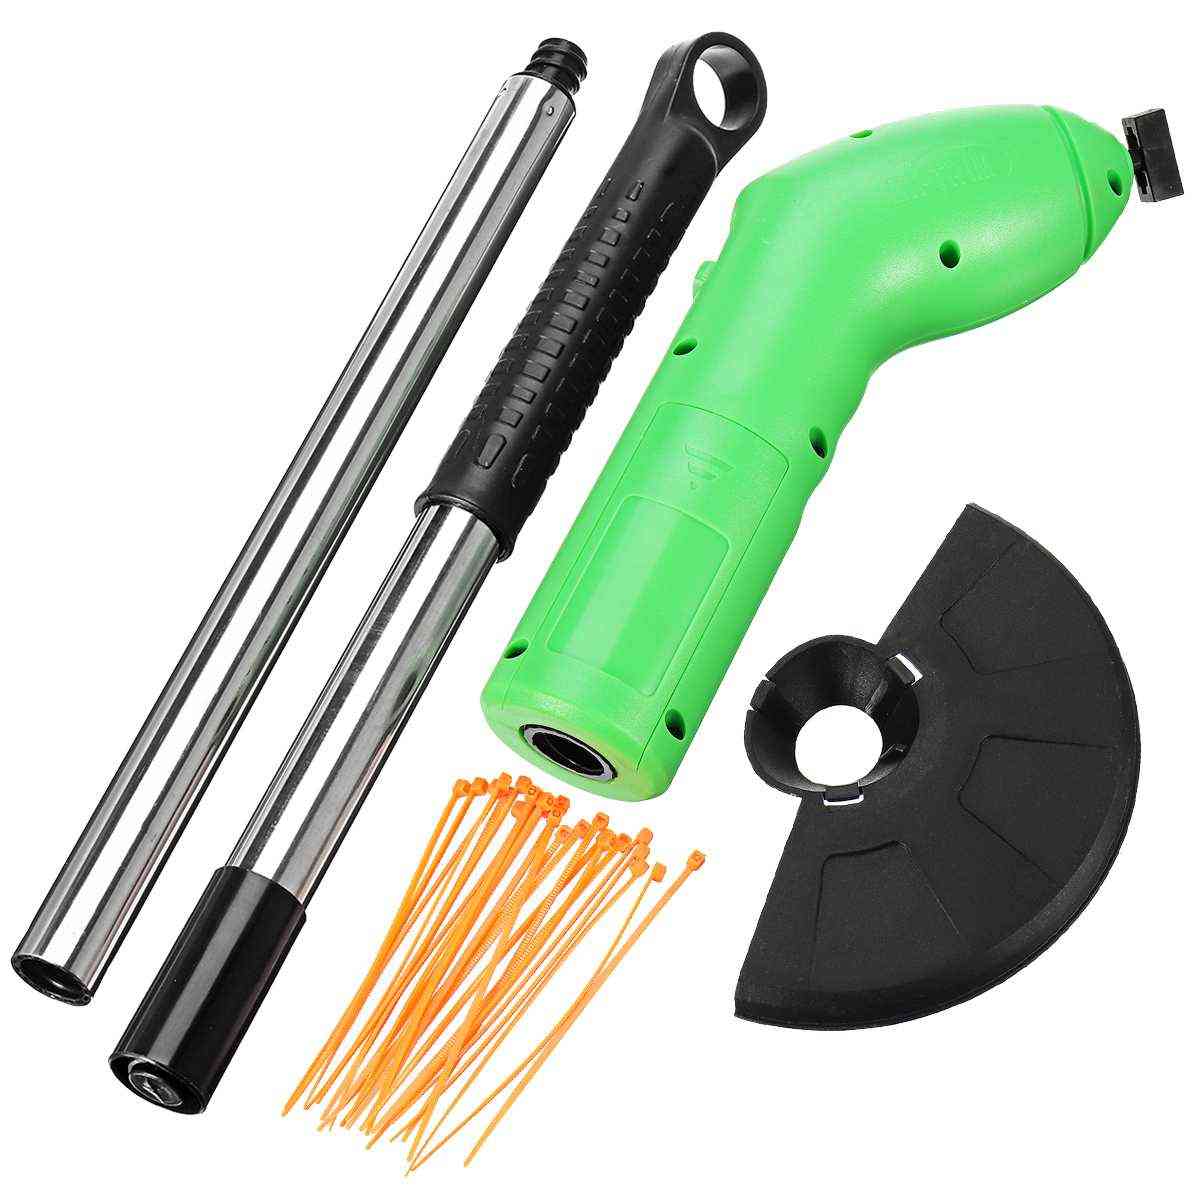 Retractable Electric Grass Trimmer Brush Cutter